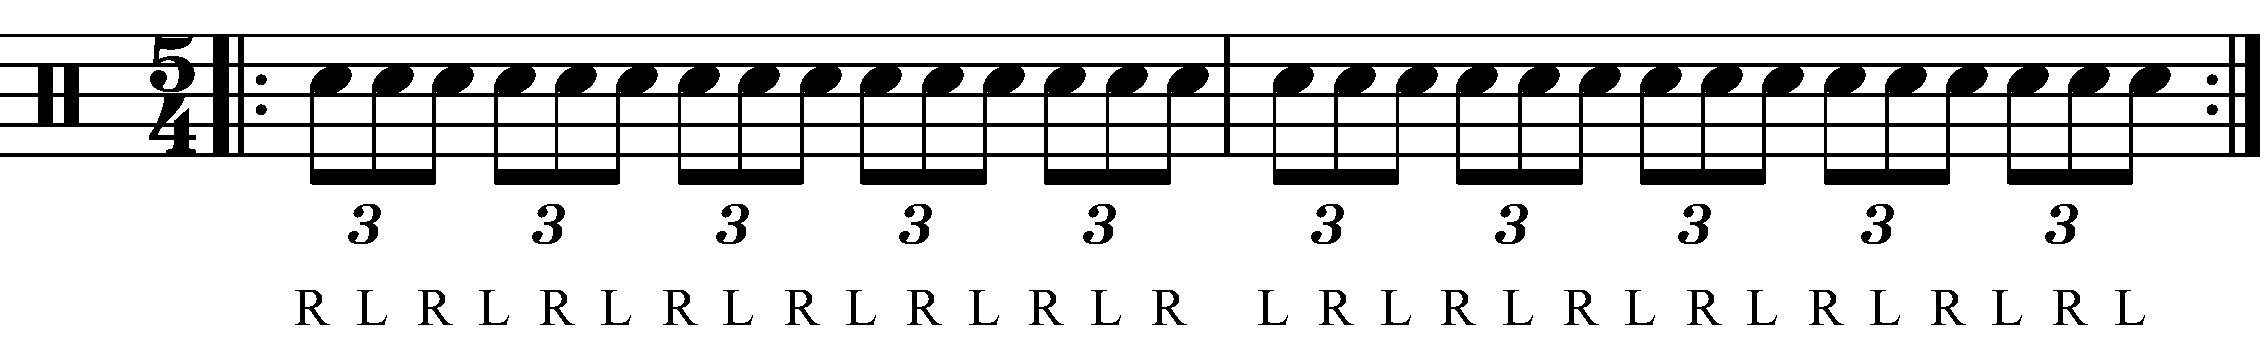 A Single Stroke Triplet in 5/4 with standard sticking